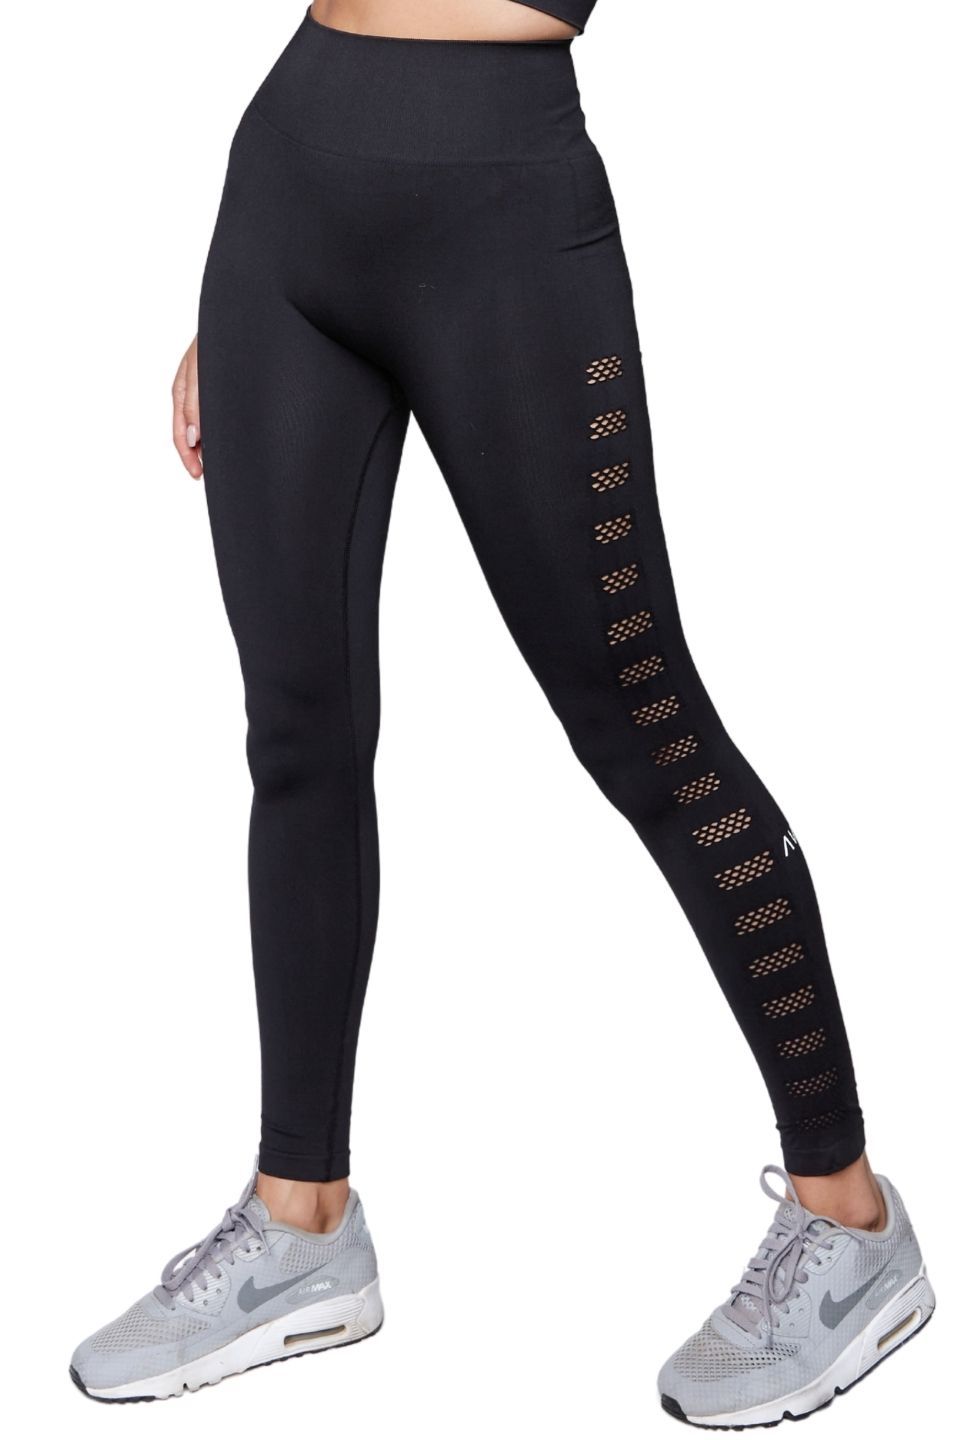 Power Mesh Leggings  Ava Lane Boutique - Women's clothing and accessories